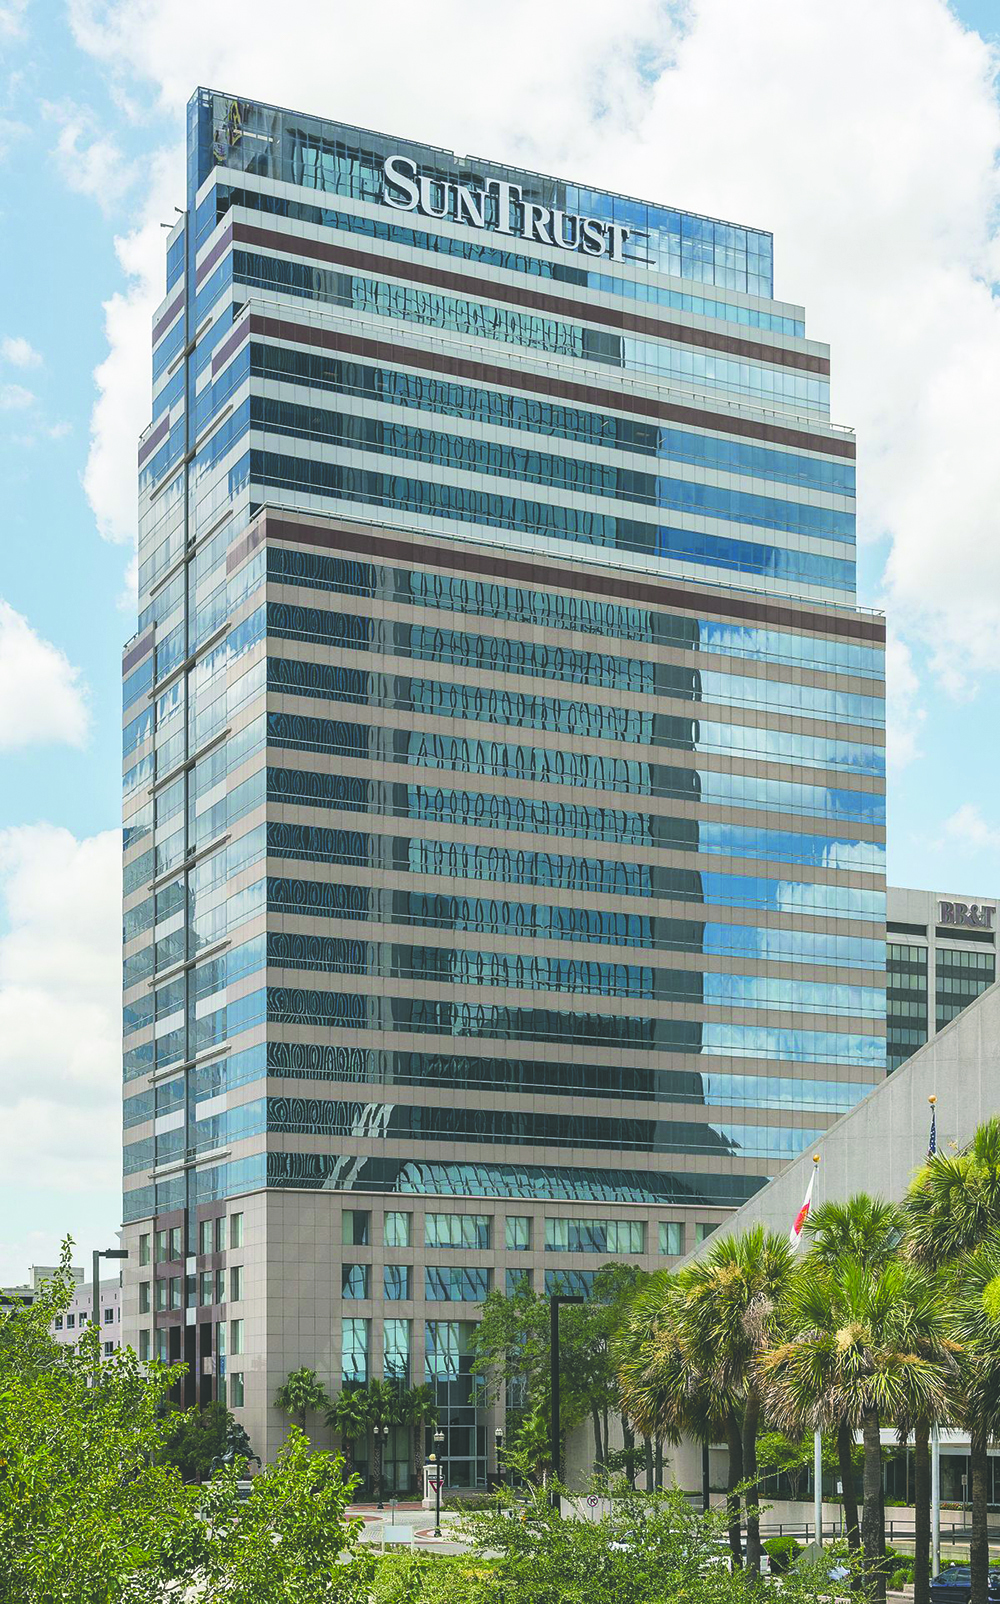 VyStar Credit Union plans to move its headquarters and up to 700 employees into the 23-story building.